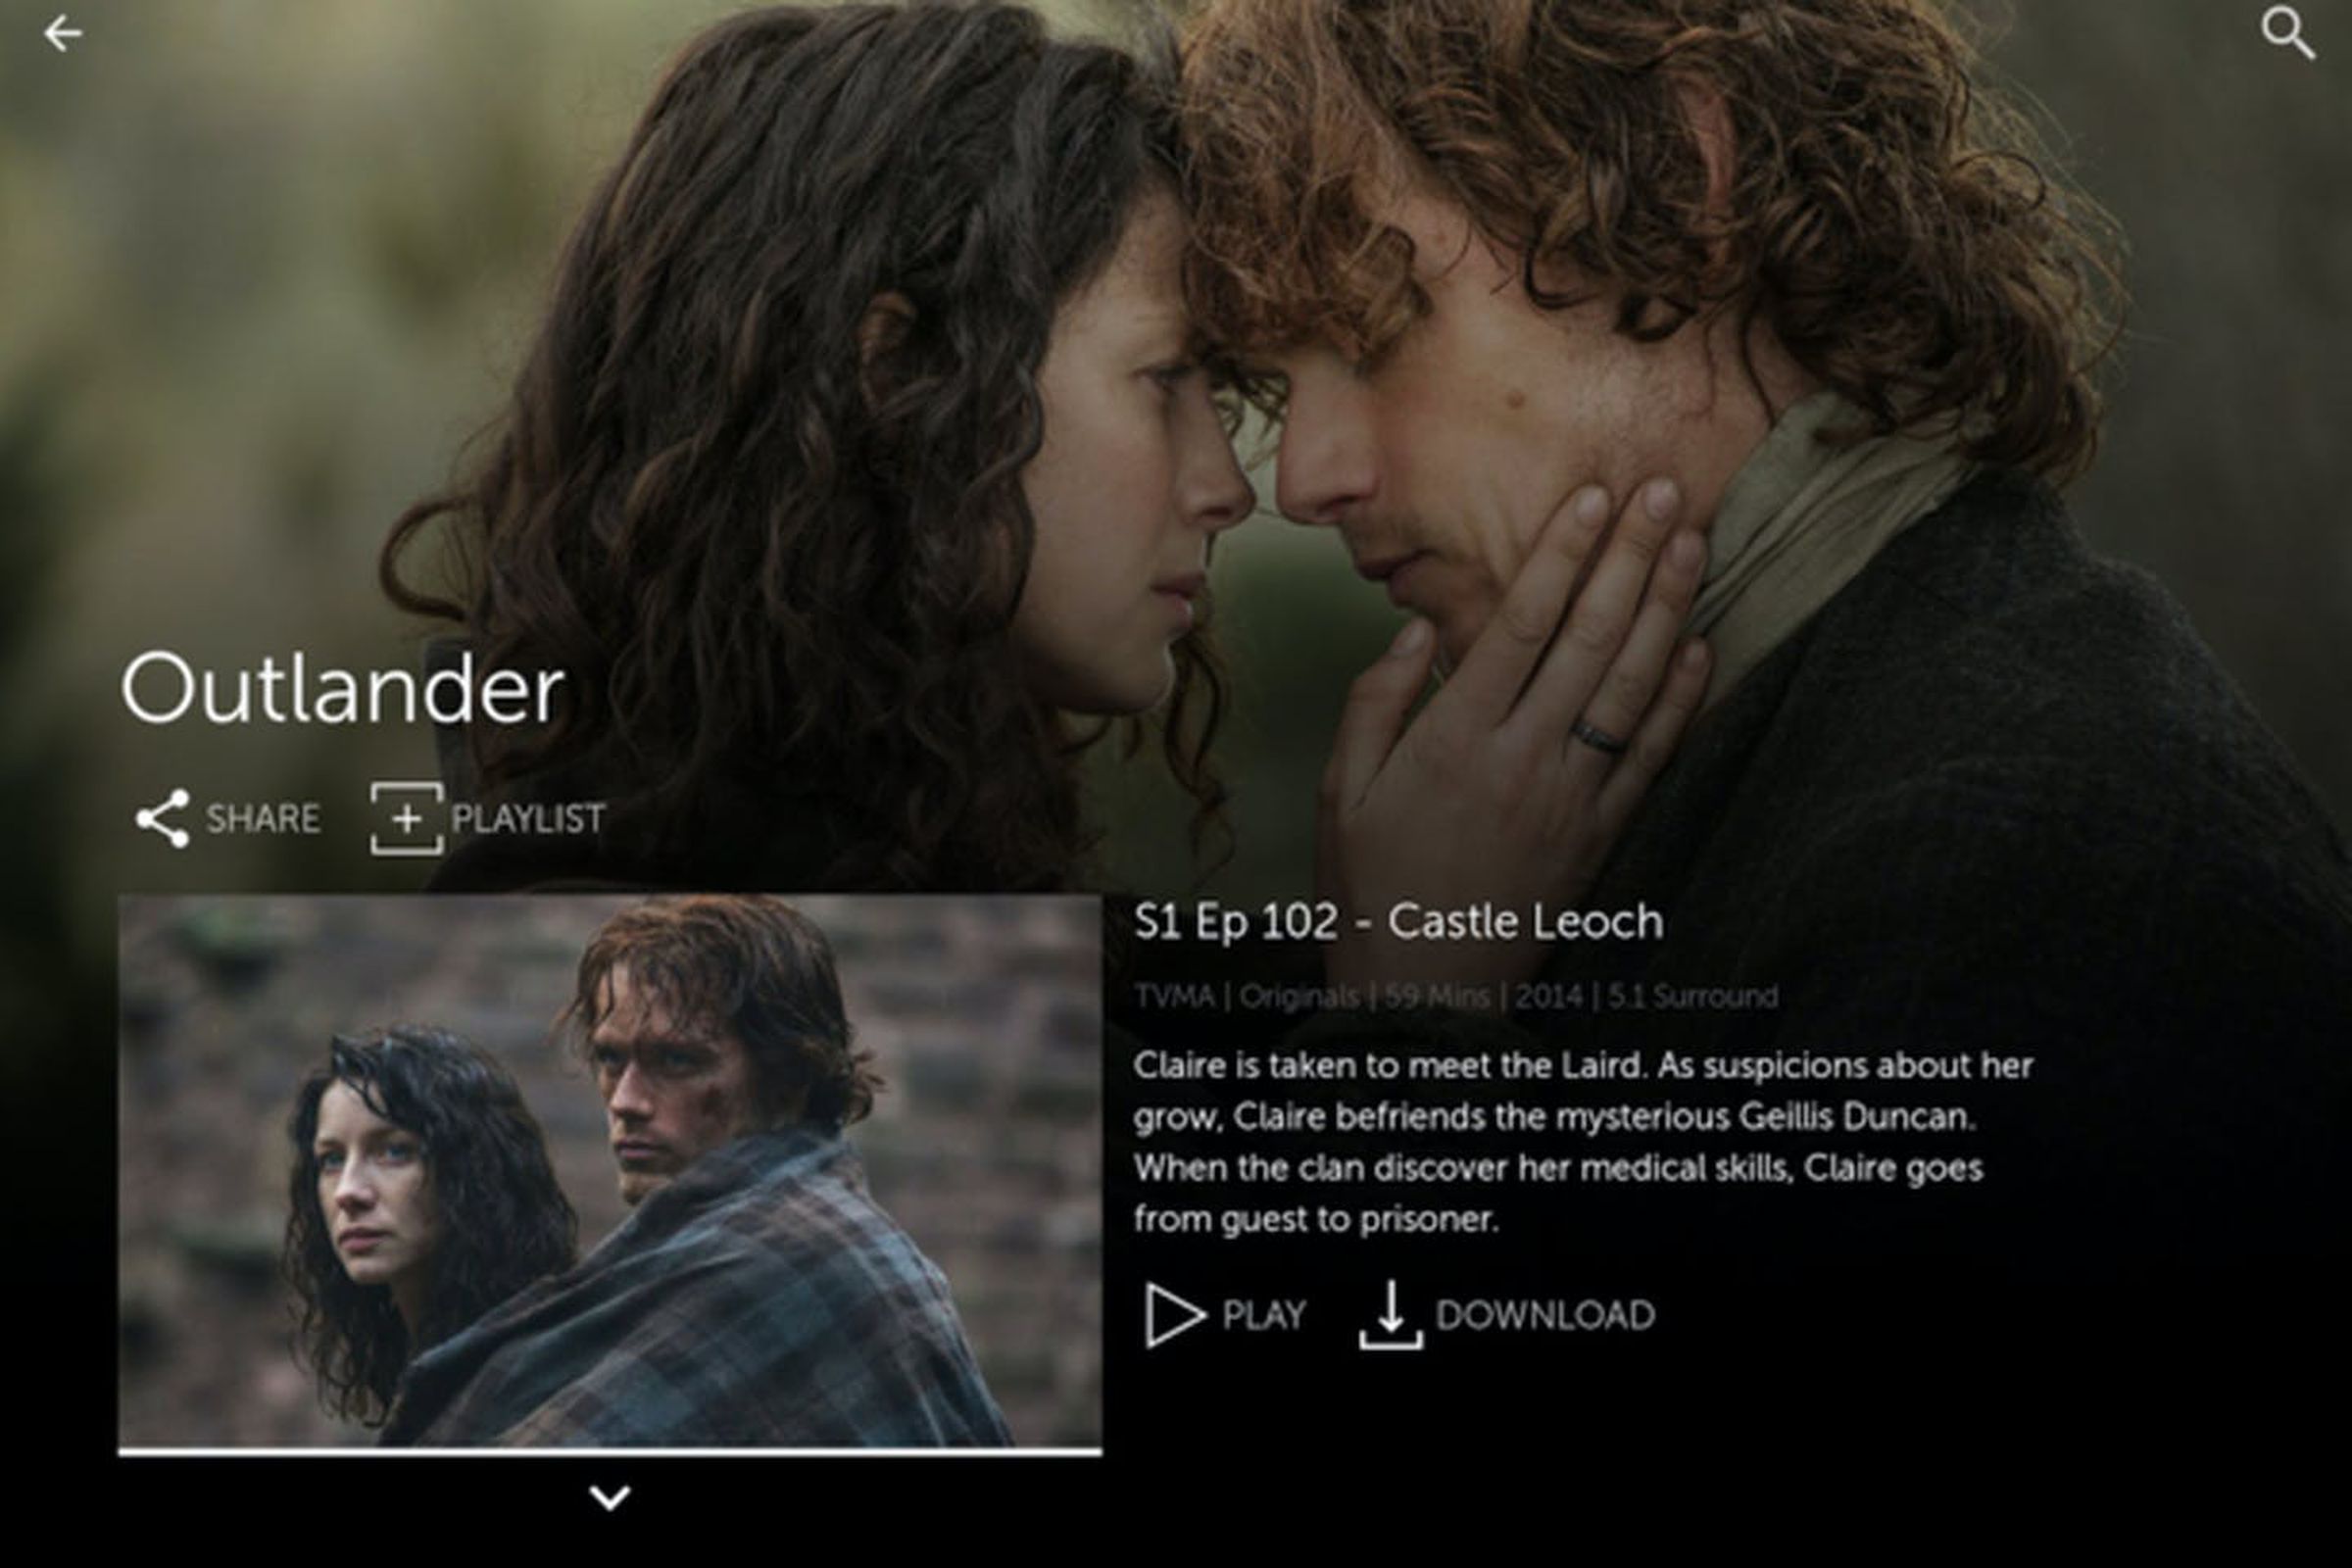 Outlander is one of many popular shows on Starz, which is offering discounts to both new and returning subscribers.